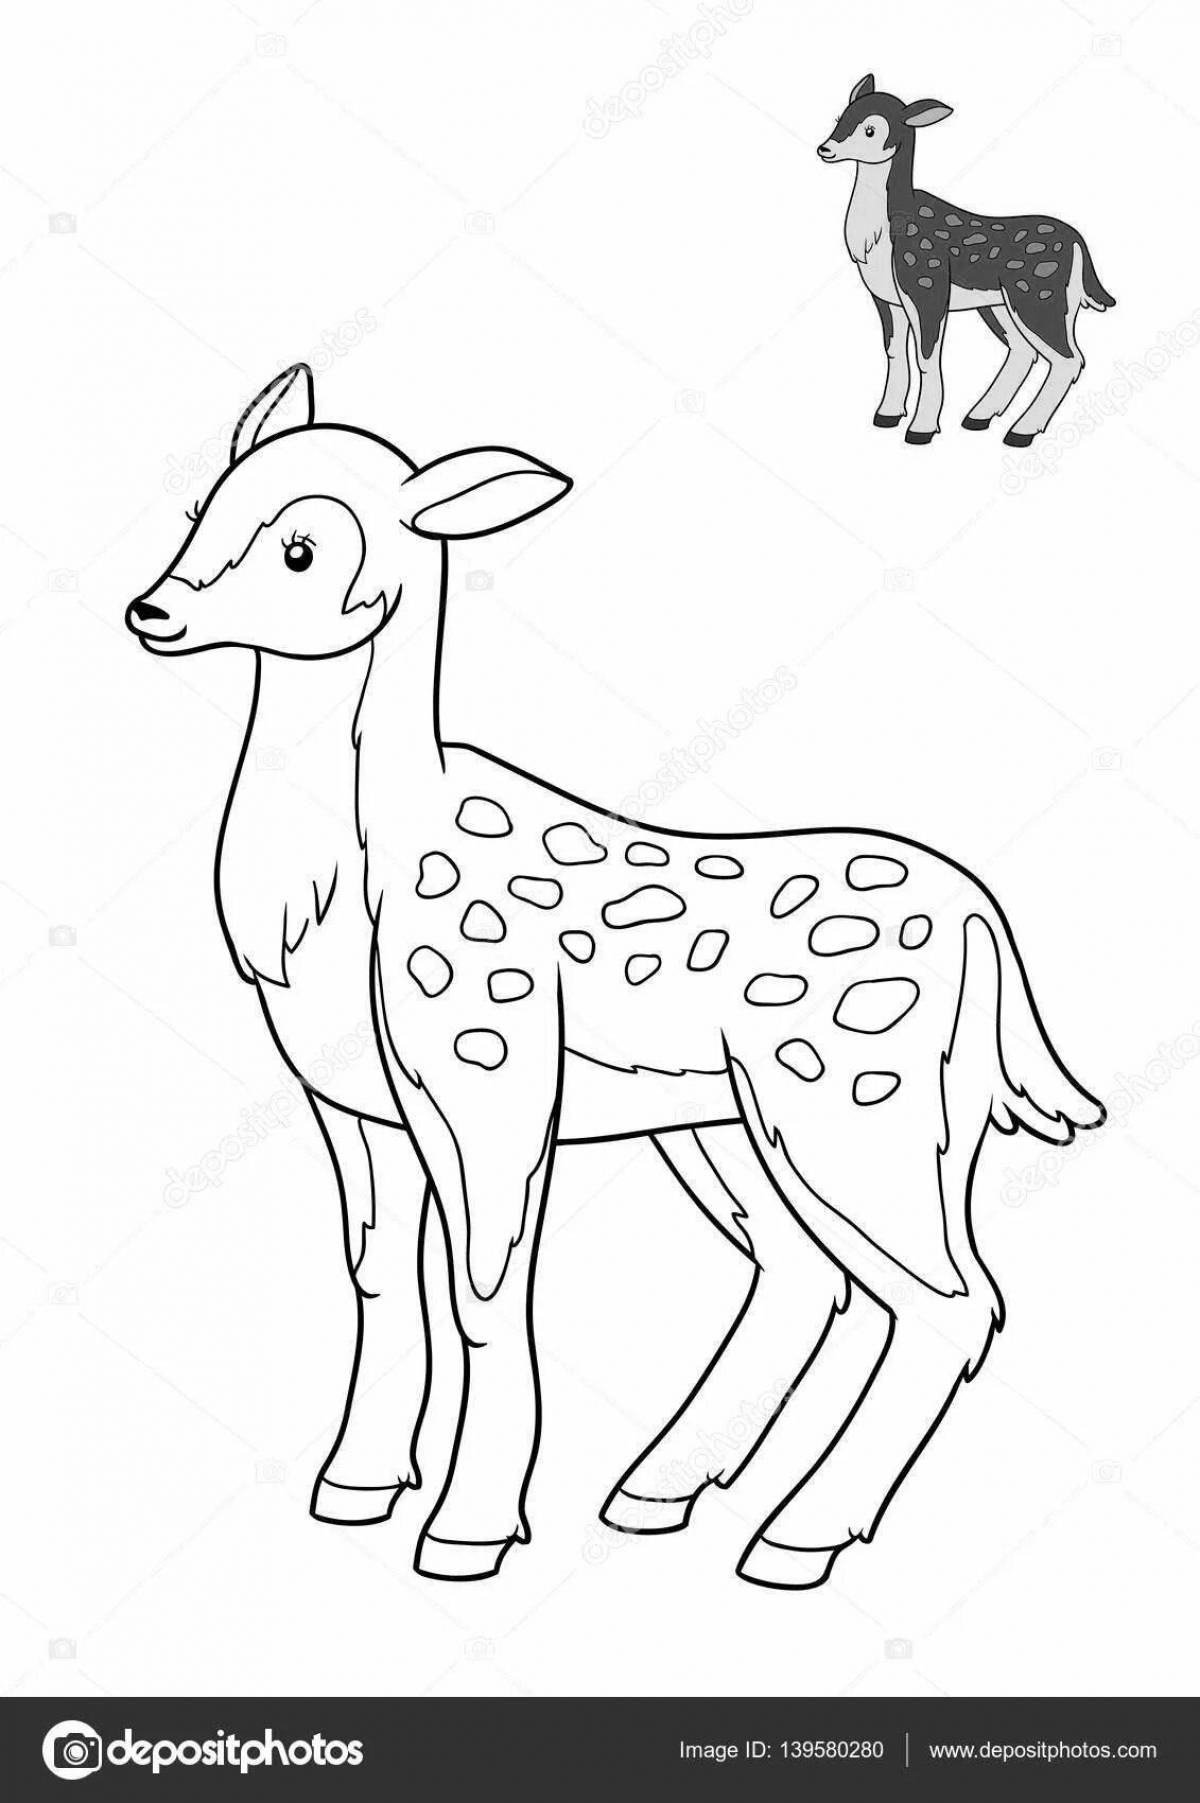 Exciting roe deer coloring book for kids